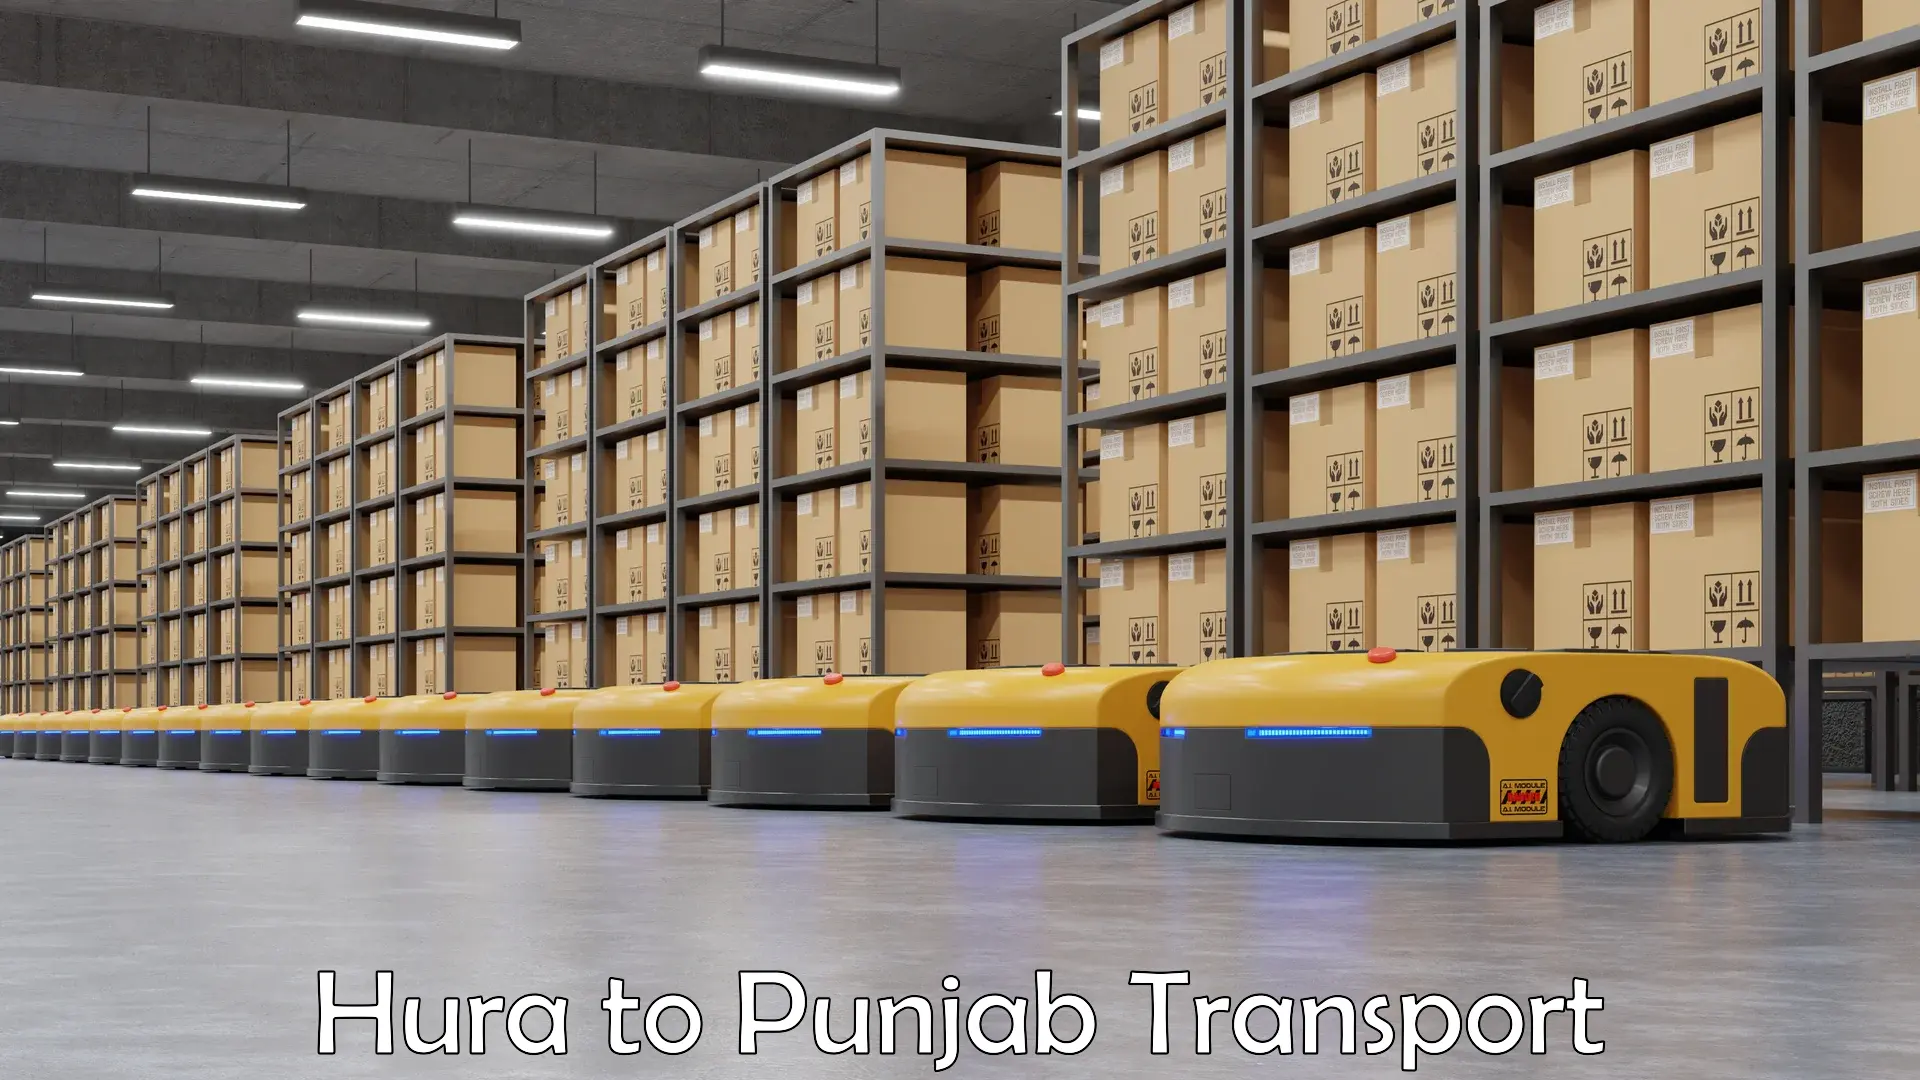 Transport bike from one state to another in Hura to Punjab